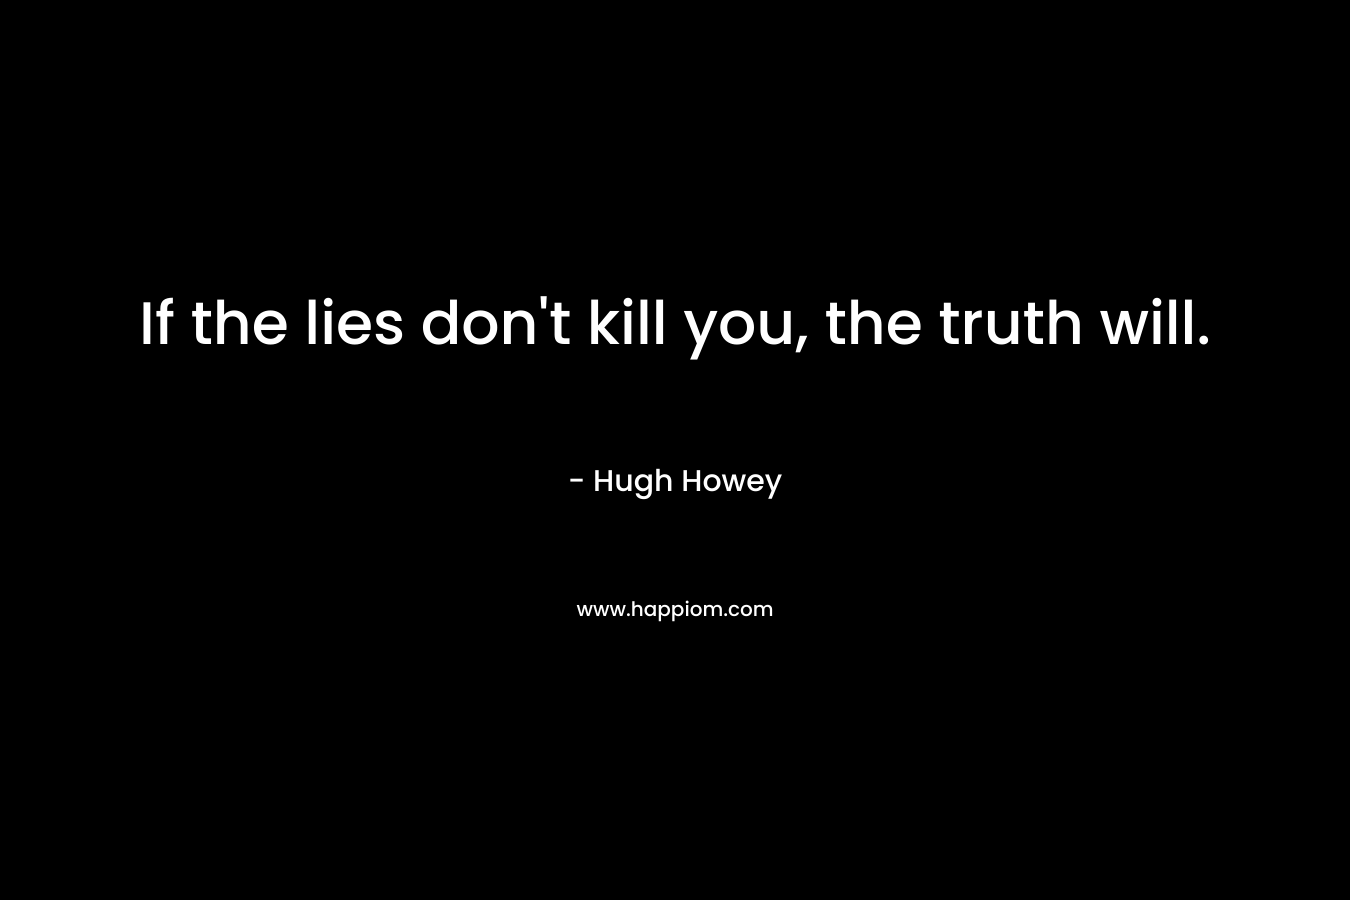 If the lies don’t kill you, the truth will. – Hugh Howey